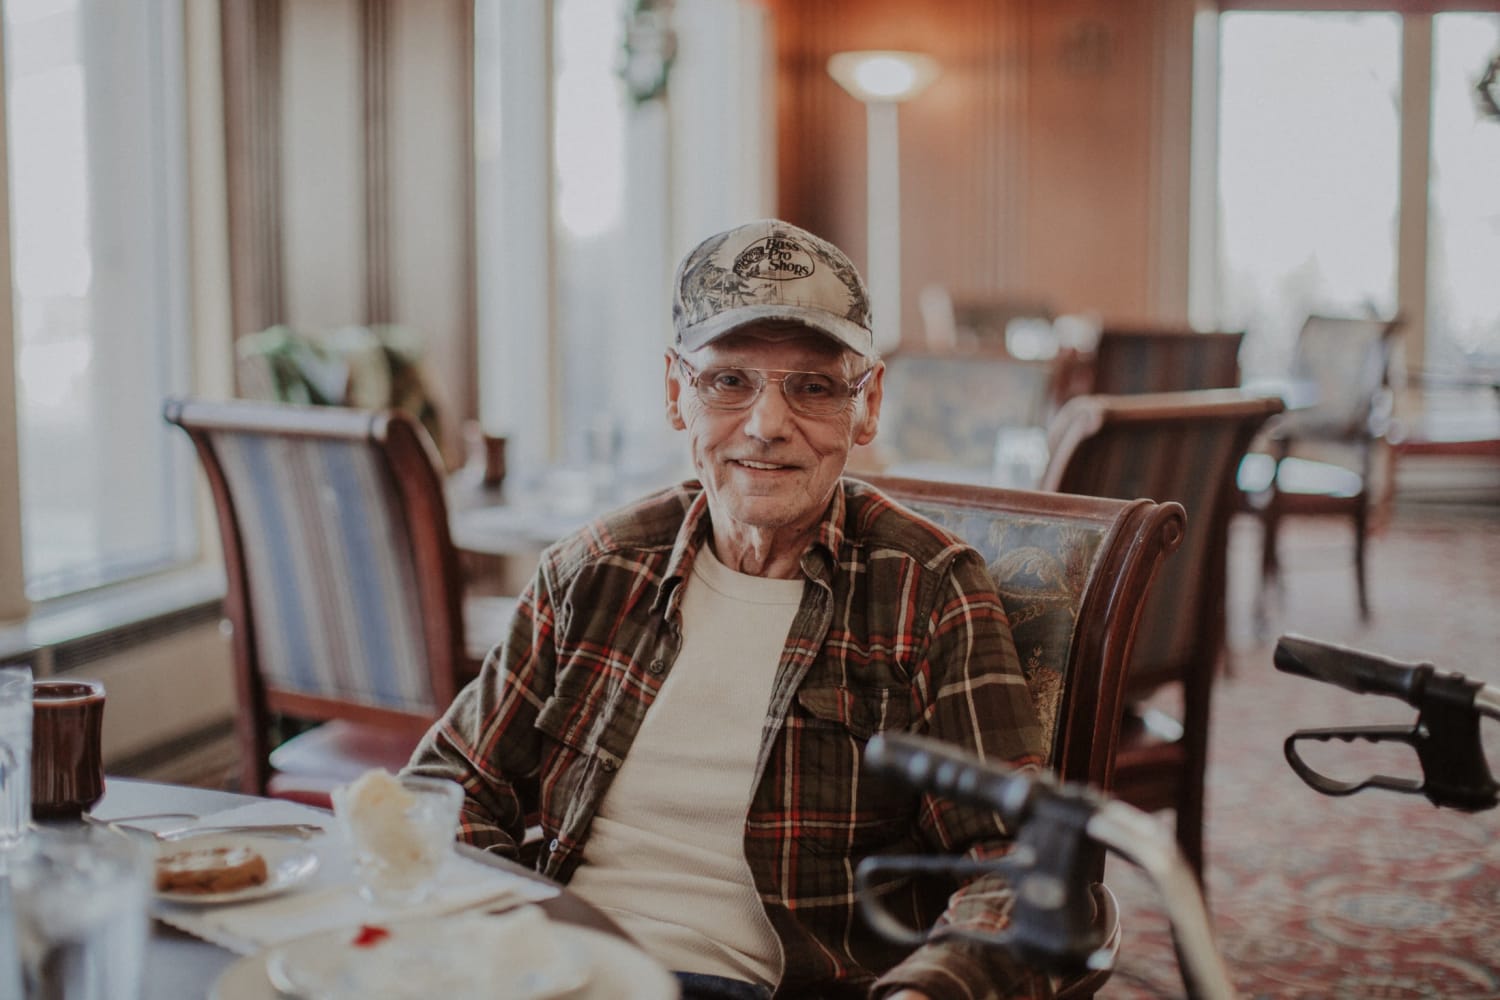 Resident smiling in the dining hall at The Whitcomb Senior Living Tower in St. Joseph, Michigan